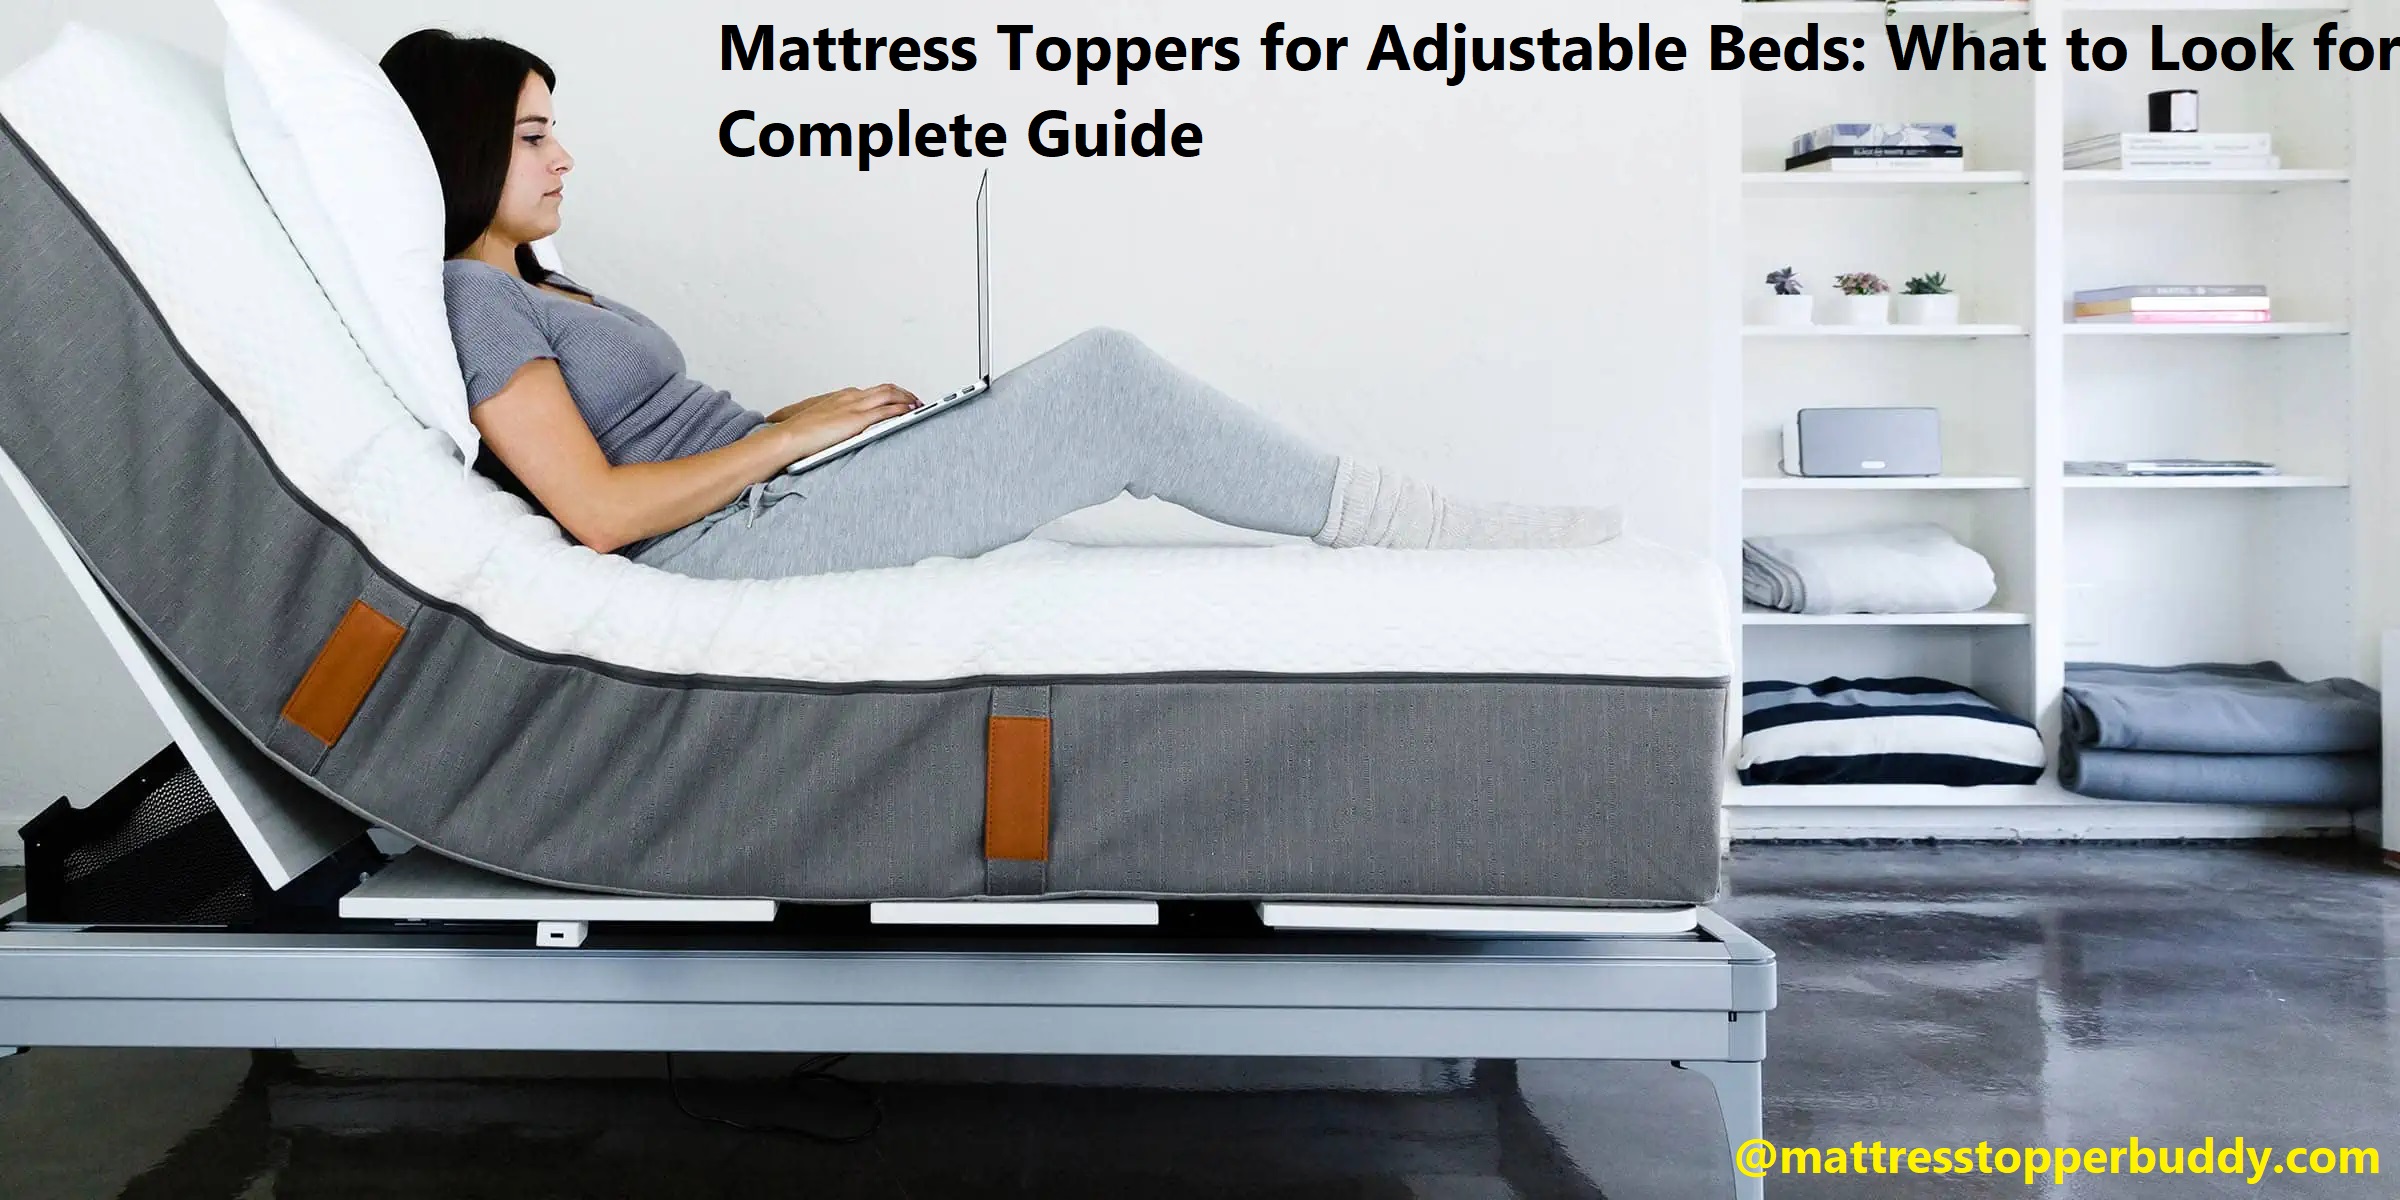 Ideal Mattress Pad For An Adjustable Bed 